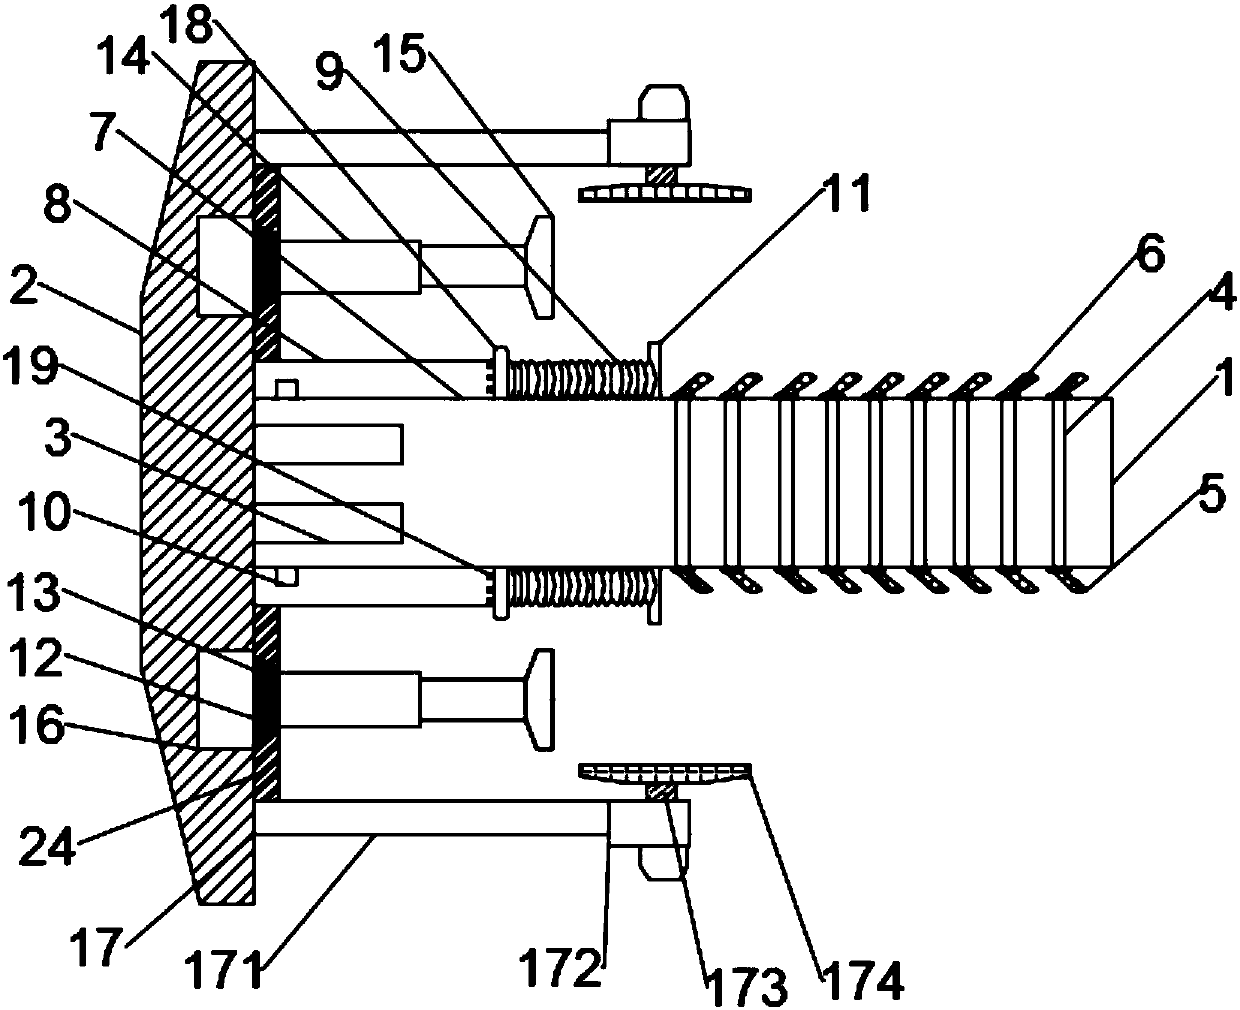 Bridge crane travel damping and limiting safety device